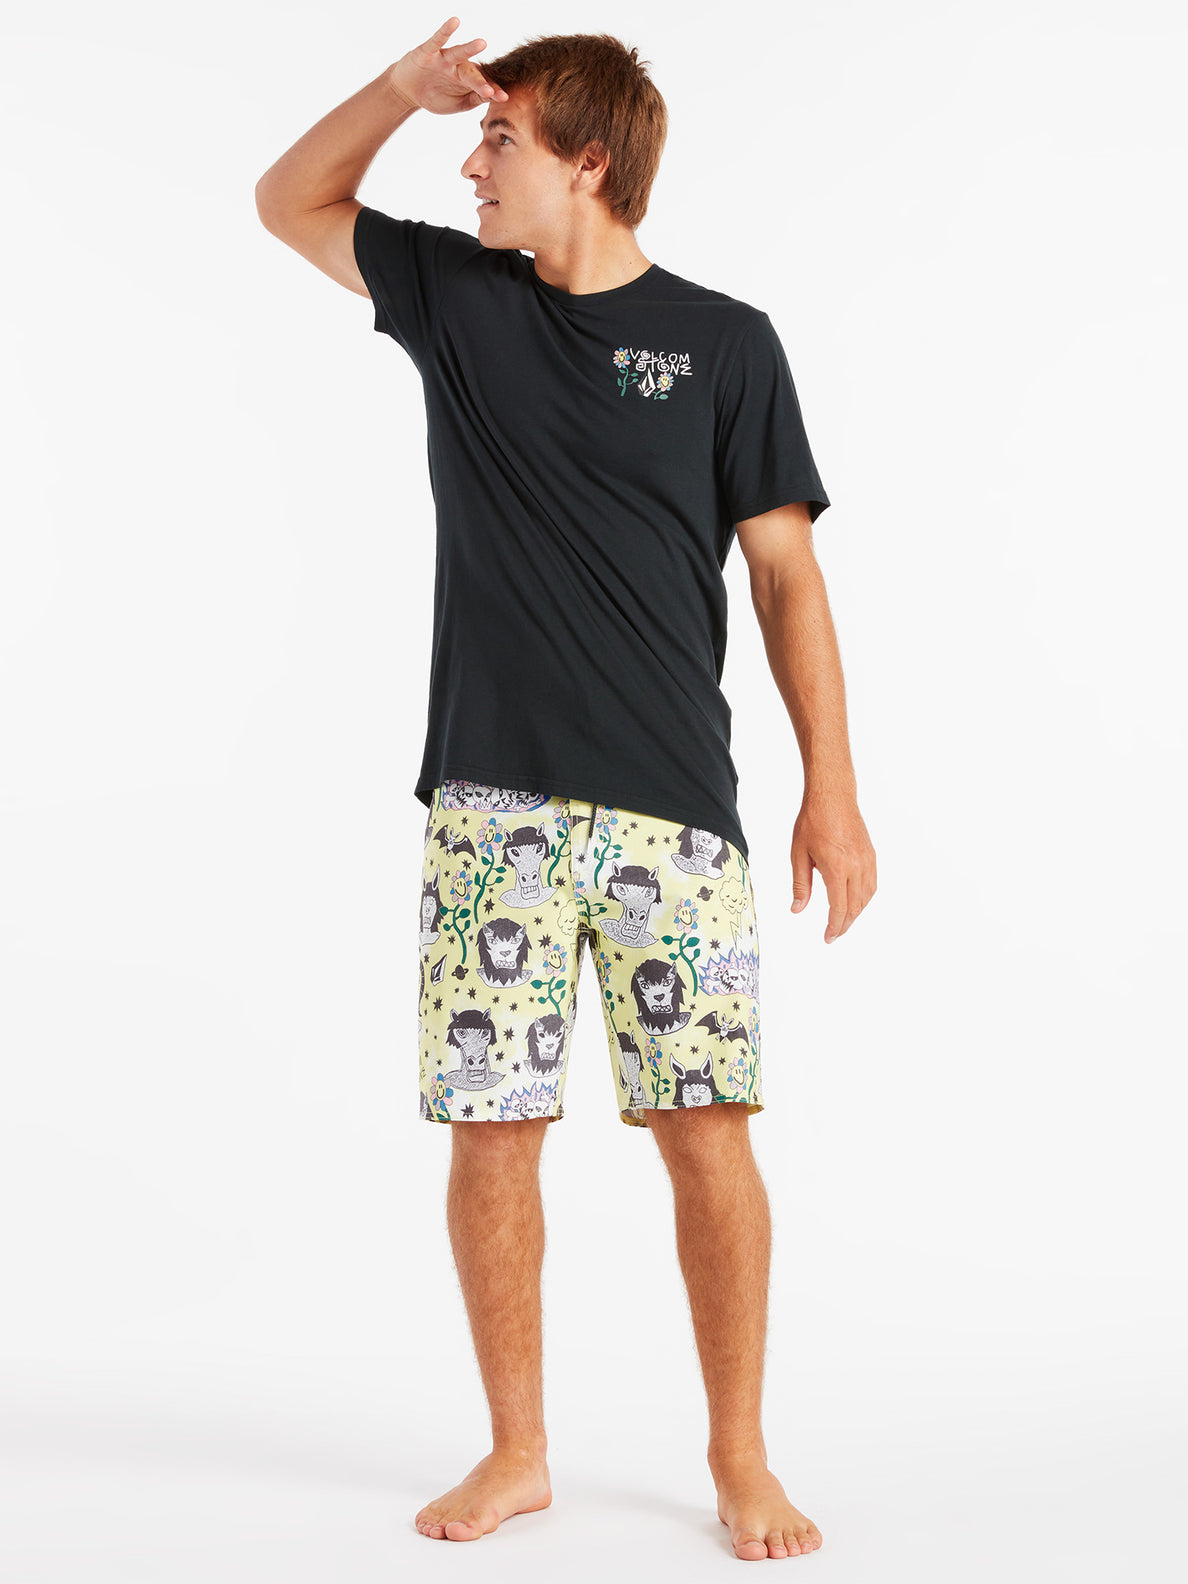 Surf Vitals Ozzy Stoneys Trunks 19 - Glimmer Yellow (A0822211_GLY) [11]